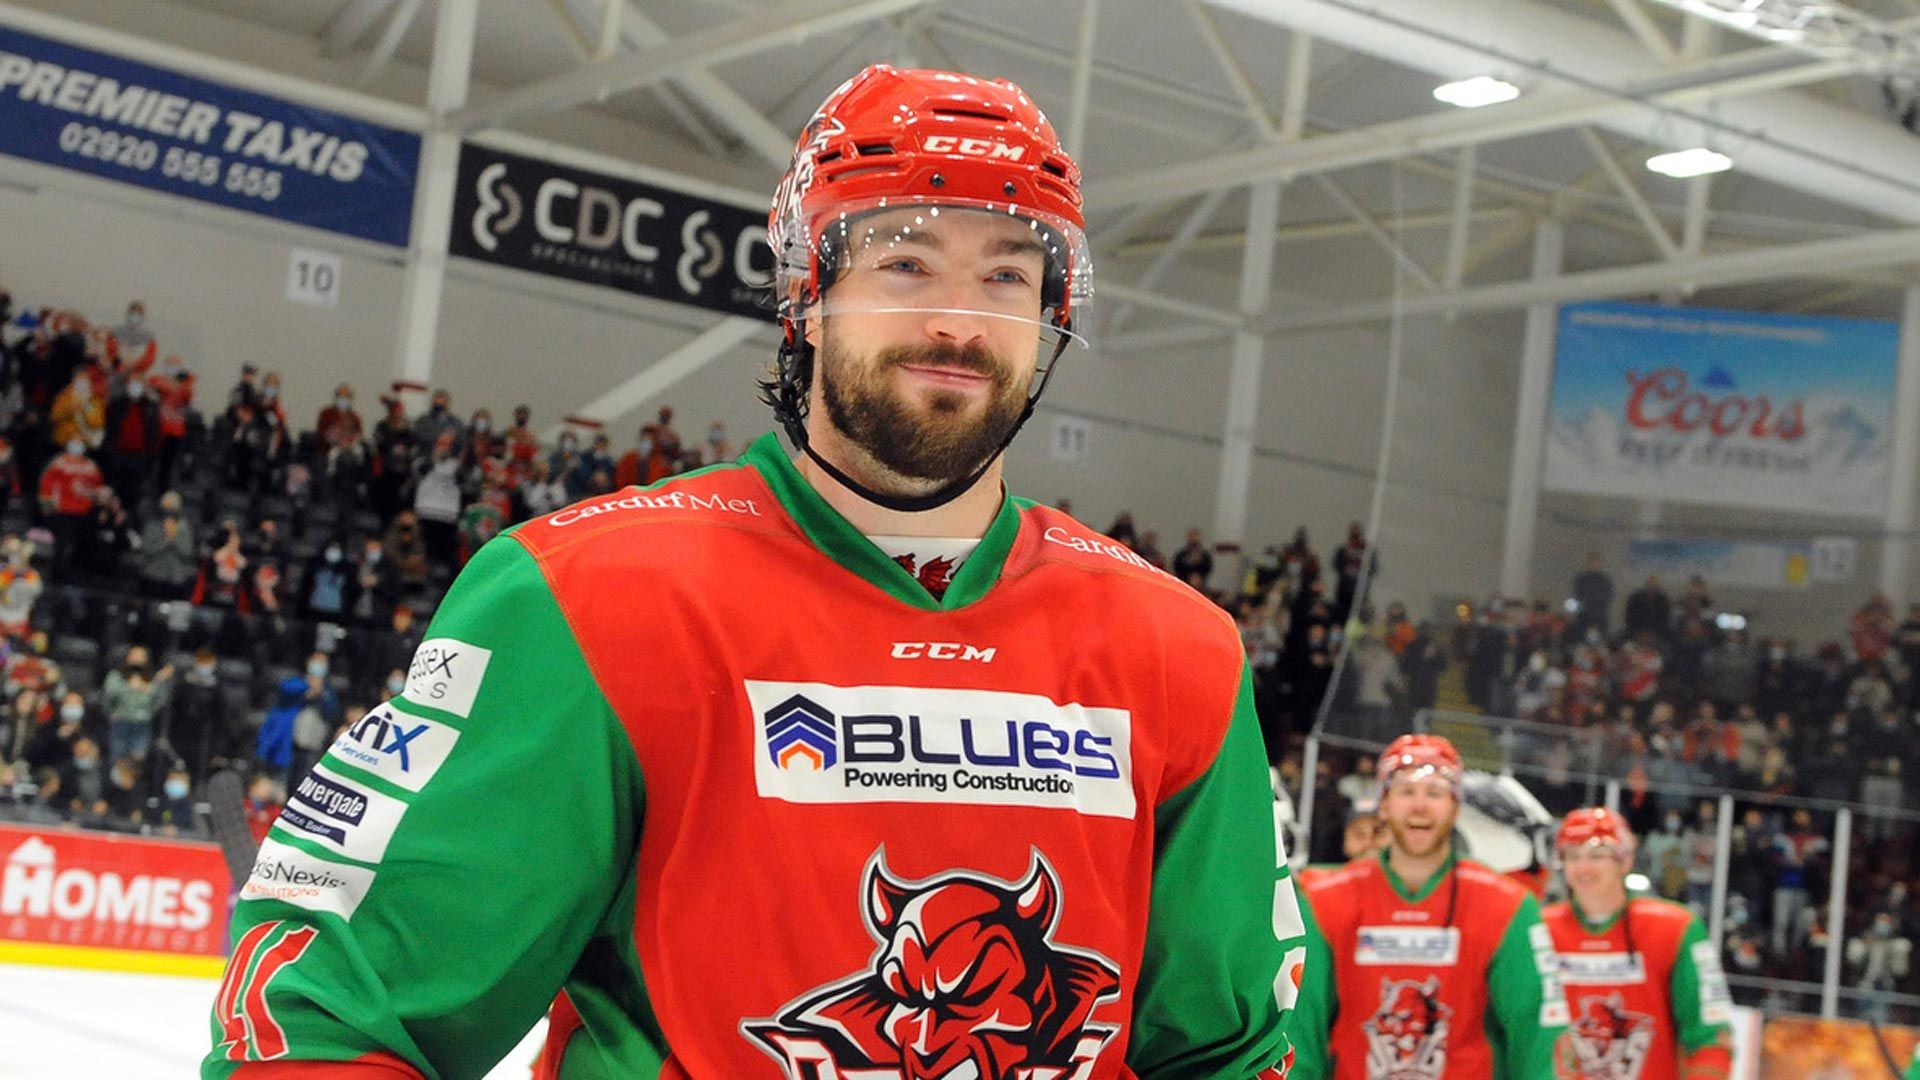 Cardiff Devils v Dundee Stars: Challenge Cup quarter final preview - The  Cardiffian